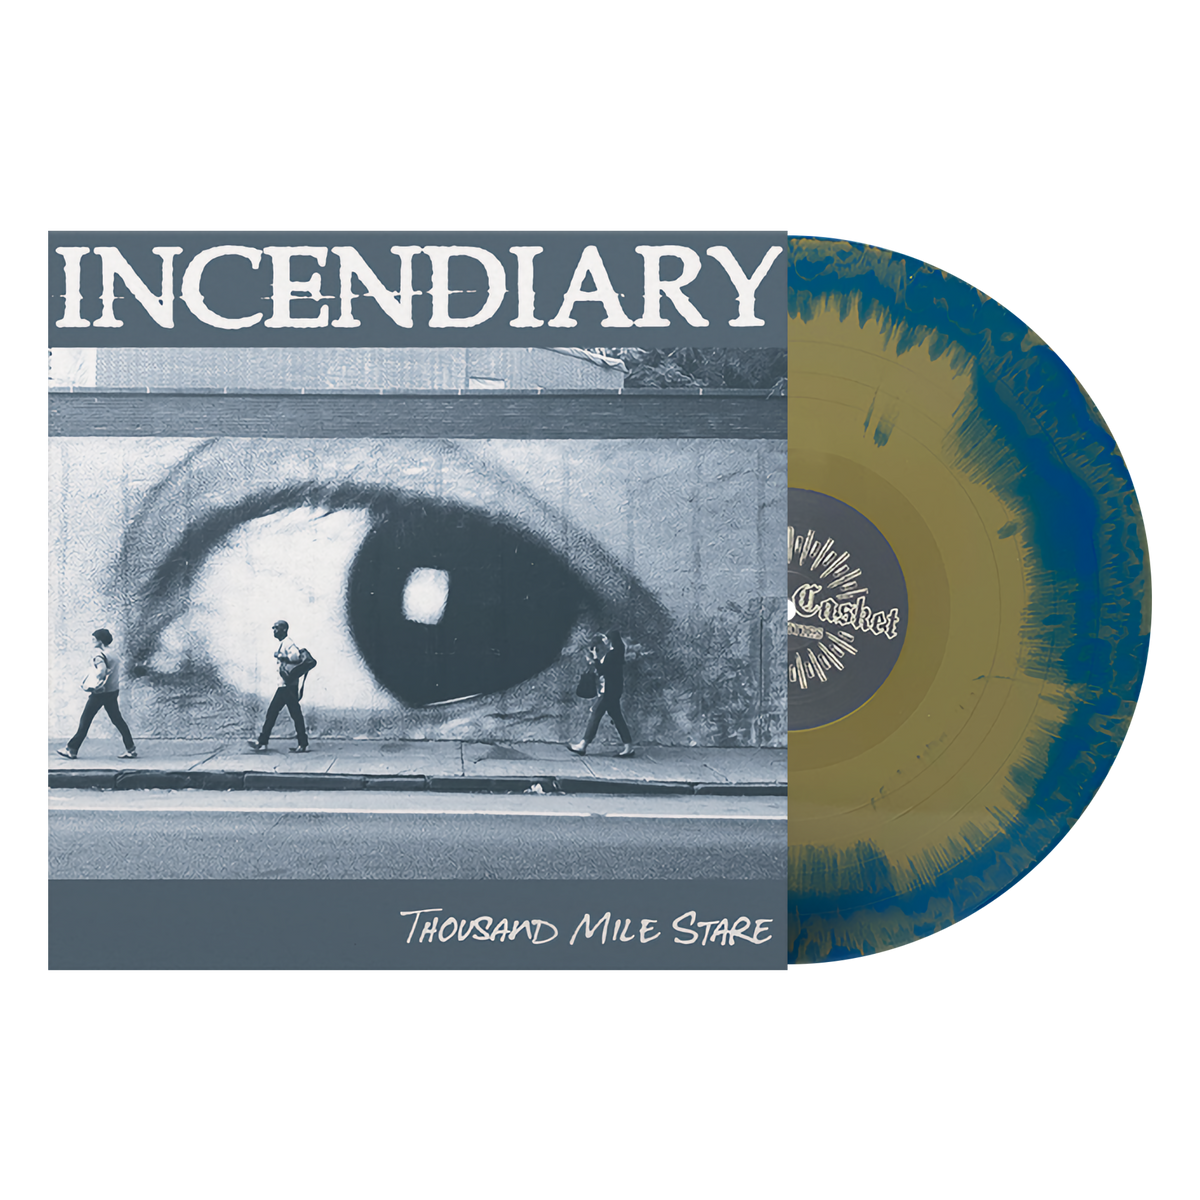 INCENDIARY "Thousand Mile Stare"-Closed Casket Activities-Deathwish Inc Europe